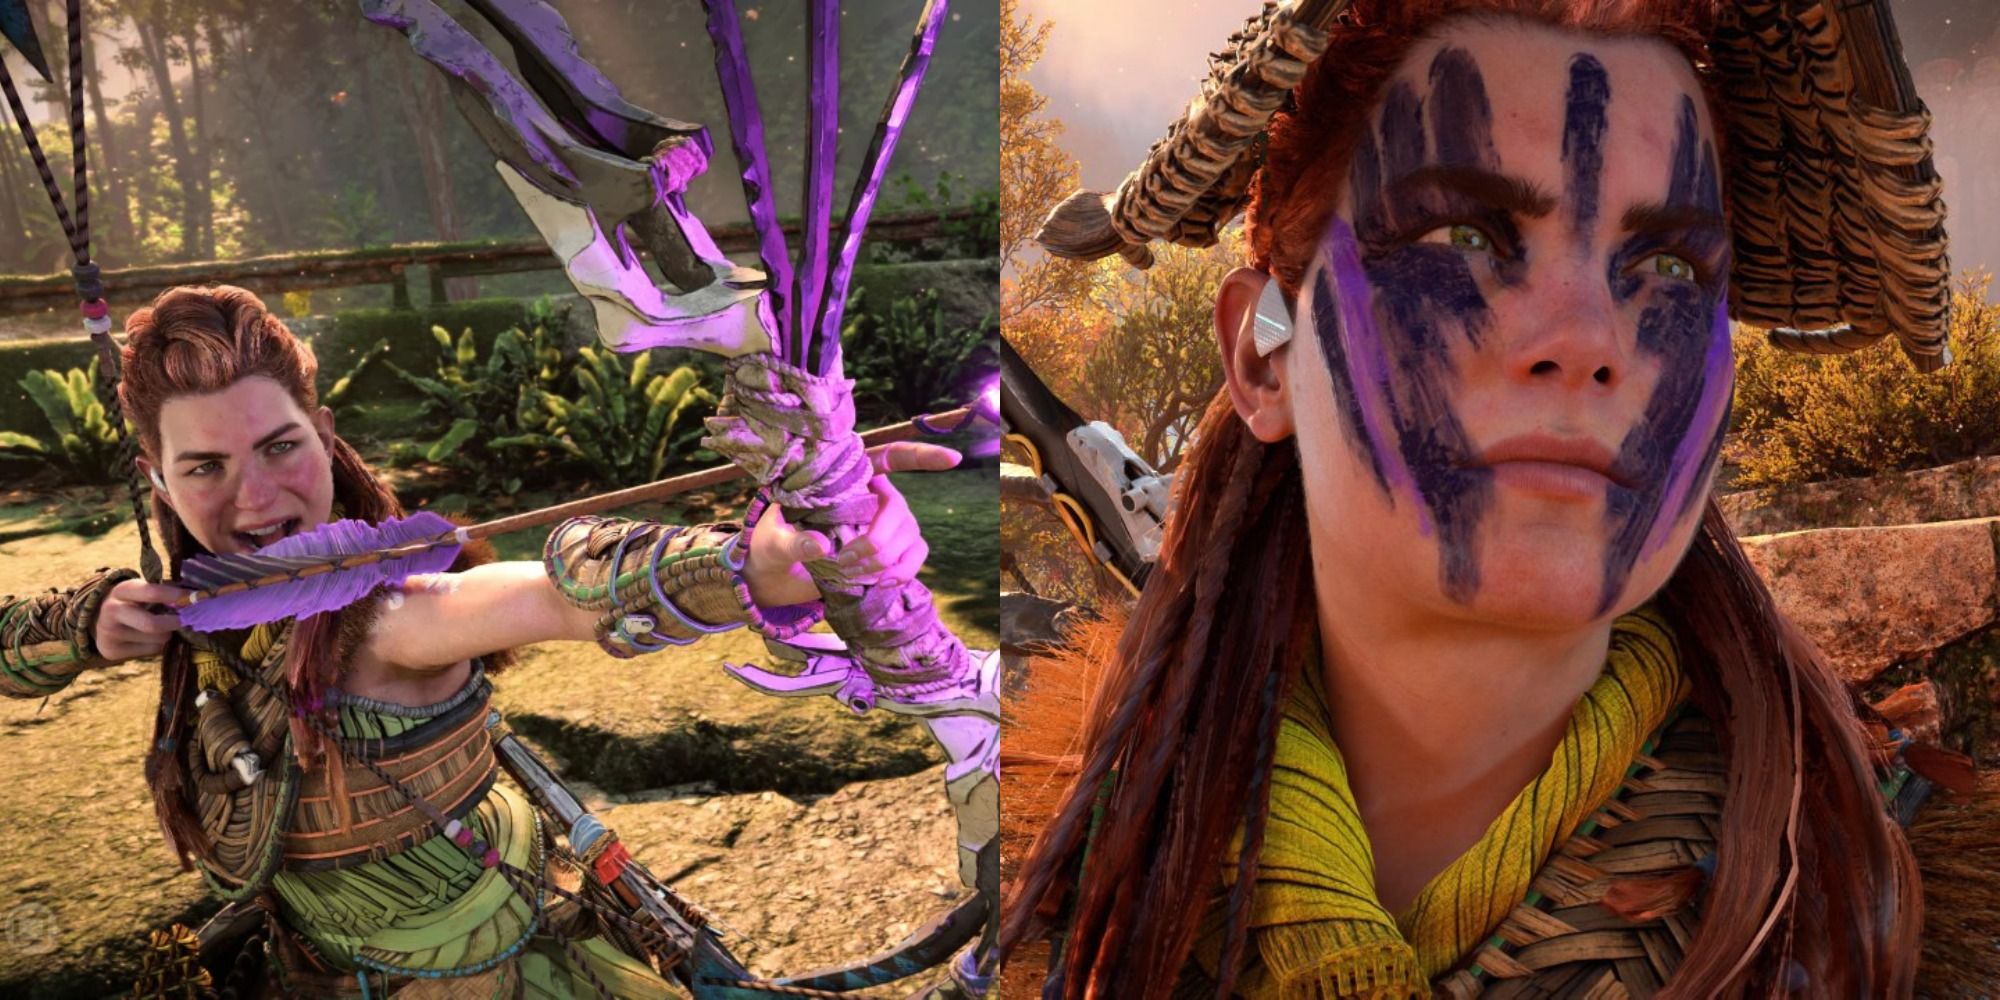 Split image showing Aloy hunting and wearing face paint in Horizon Forbidden West